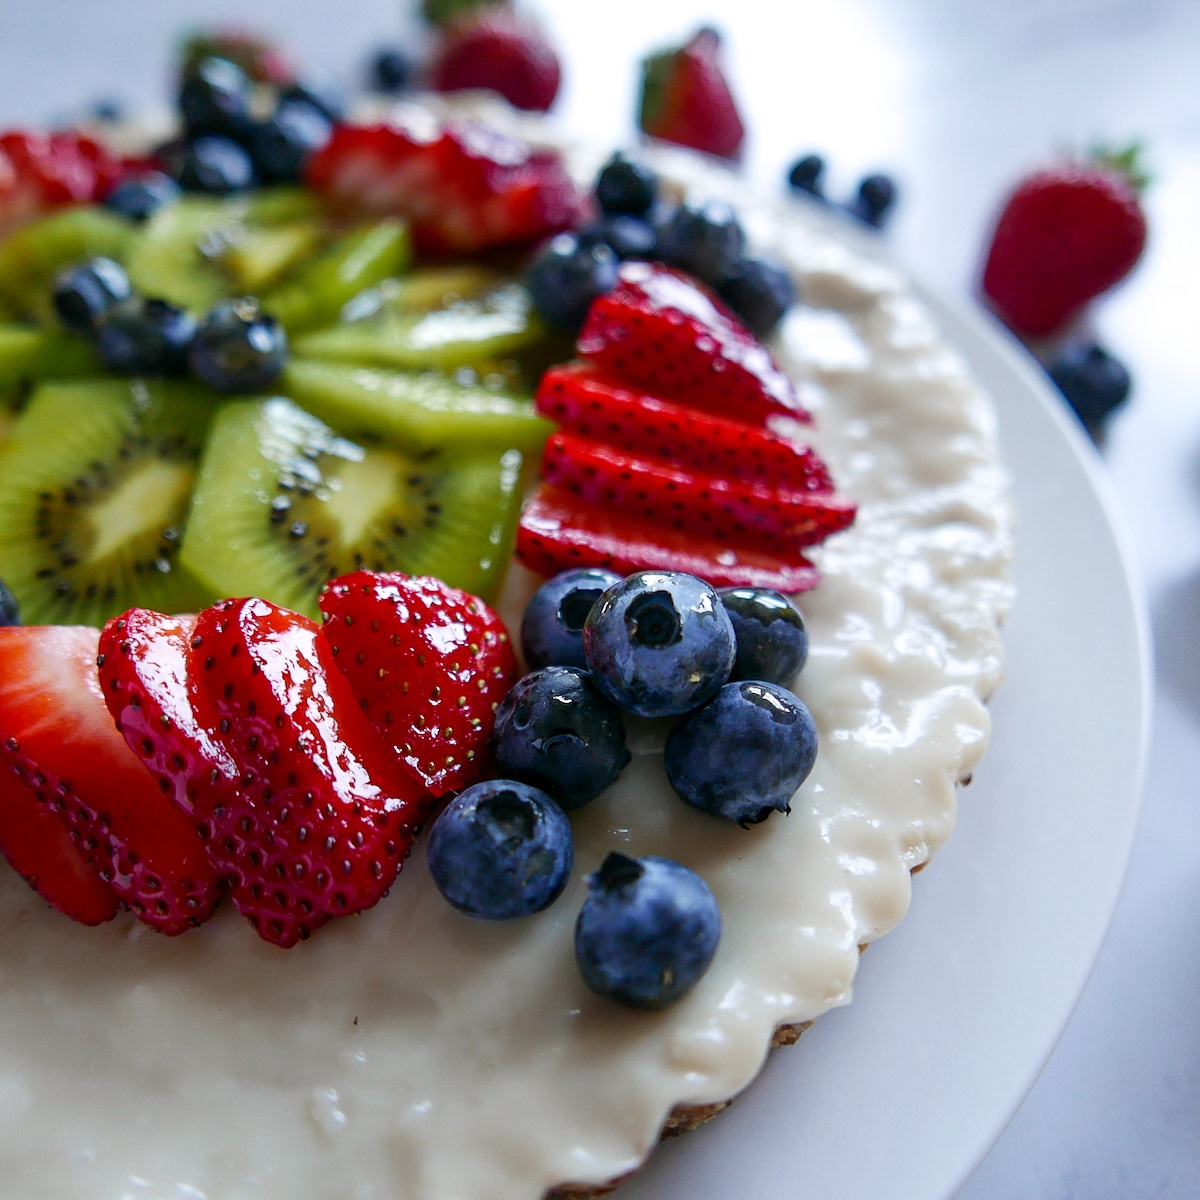 Fruit tart topped with berries and kiwi on a white platter with berries.